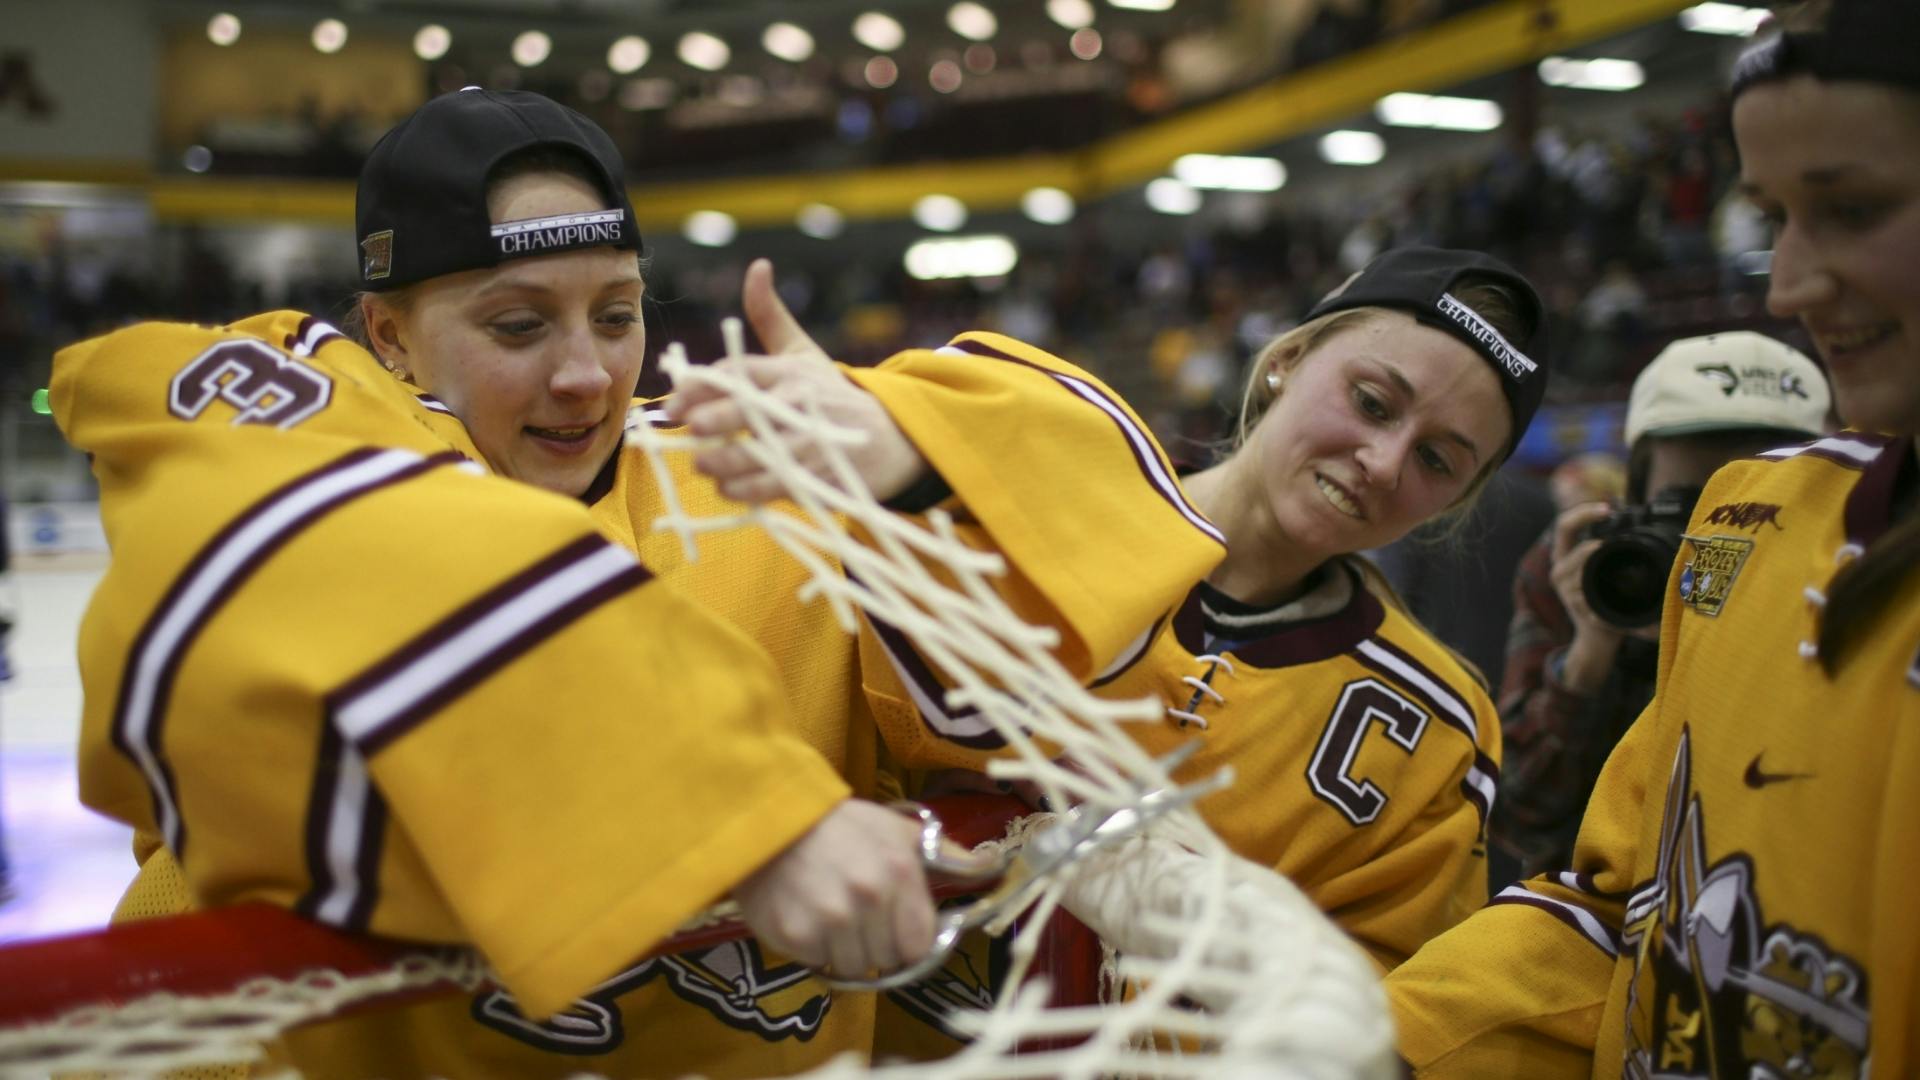 The Gophers women's hockey team won their third national title in four years Sunday by beating Harvard 4-1.